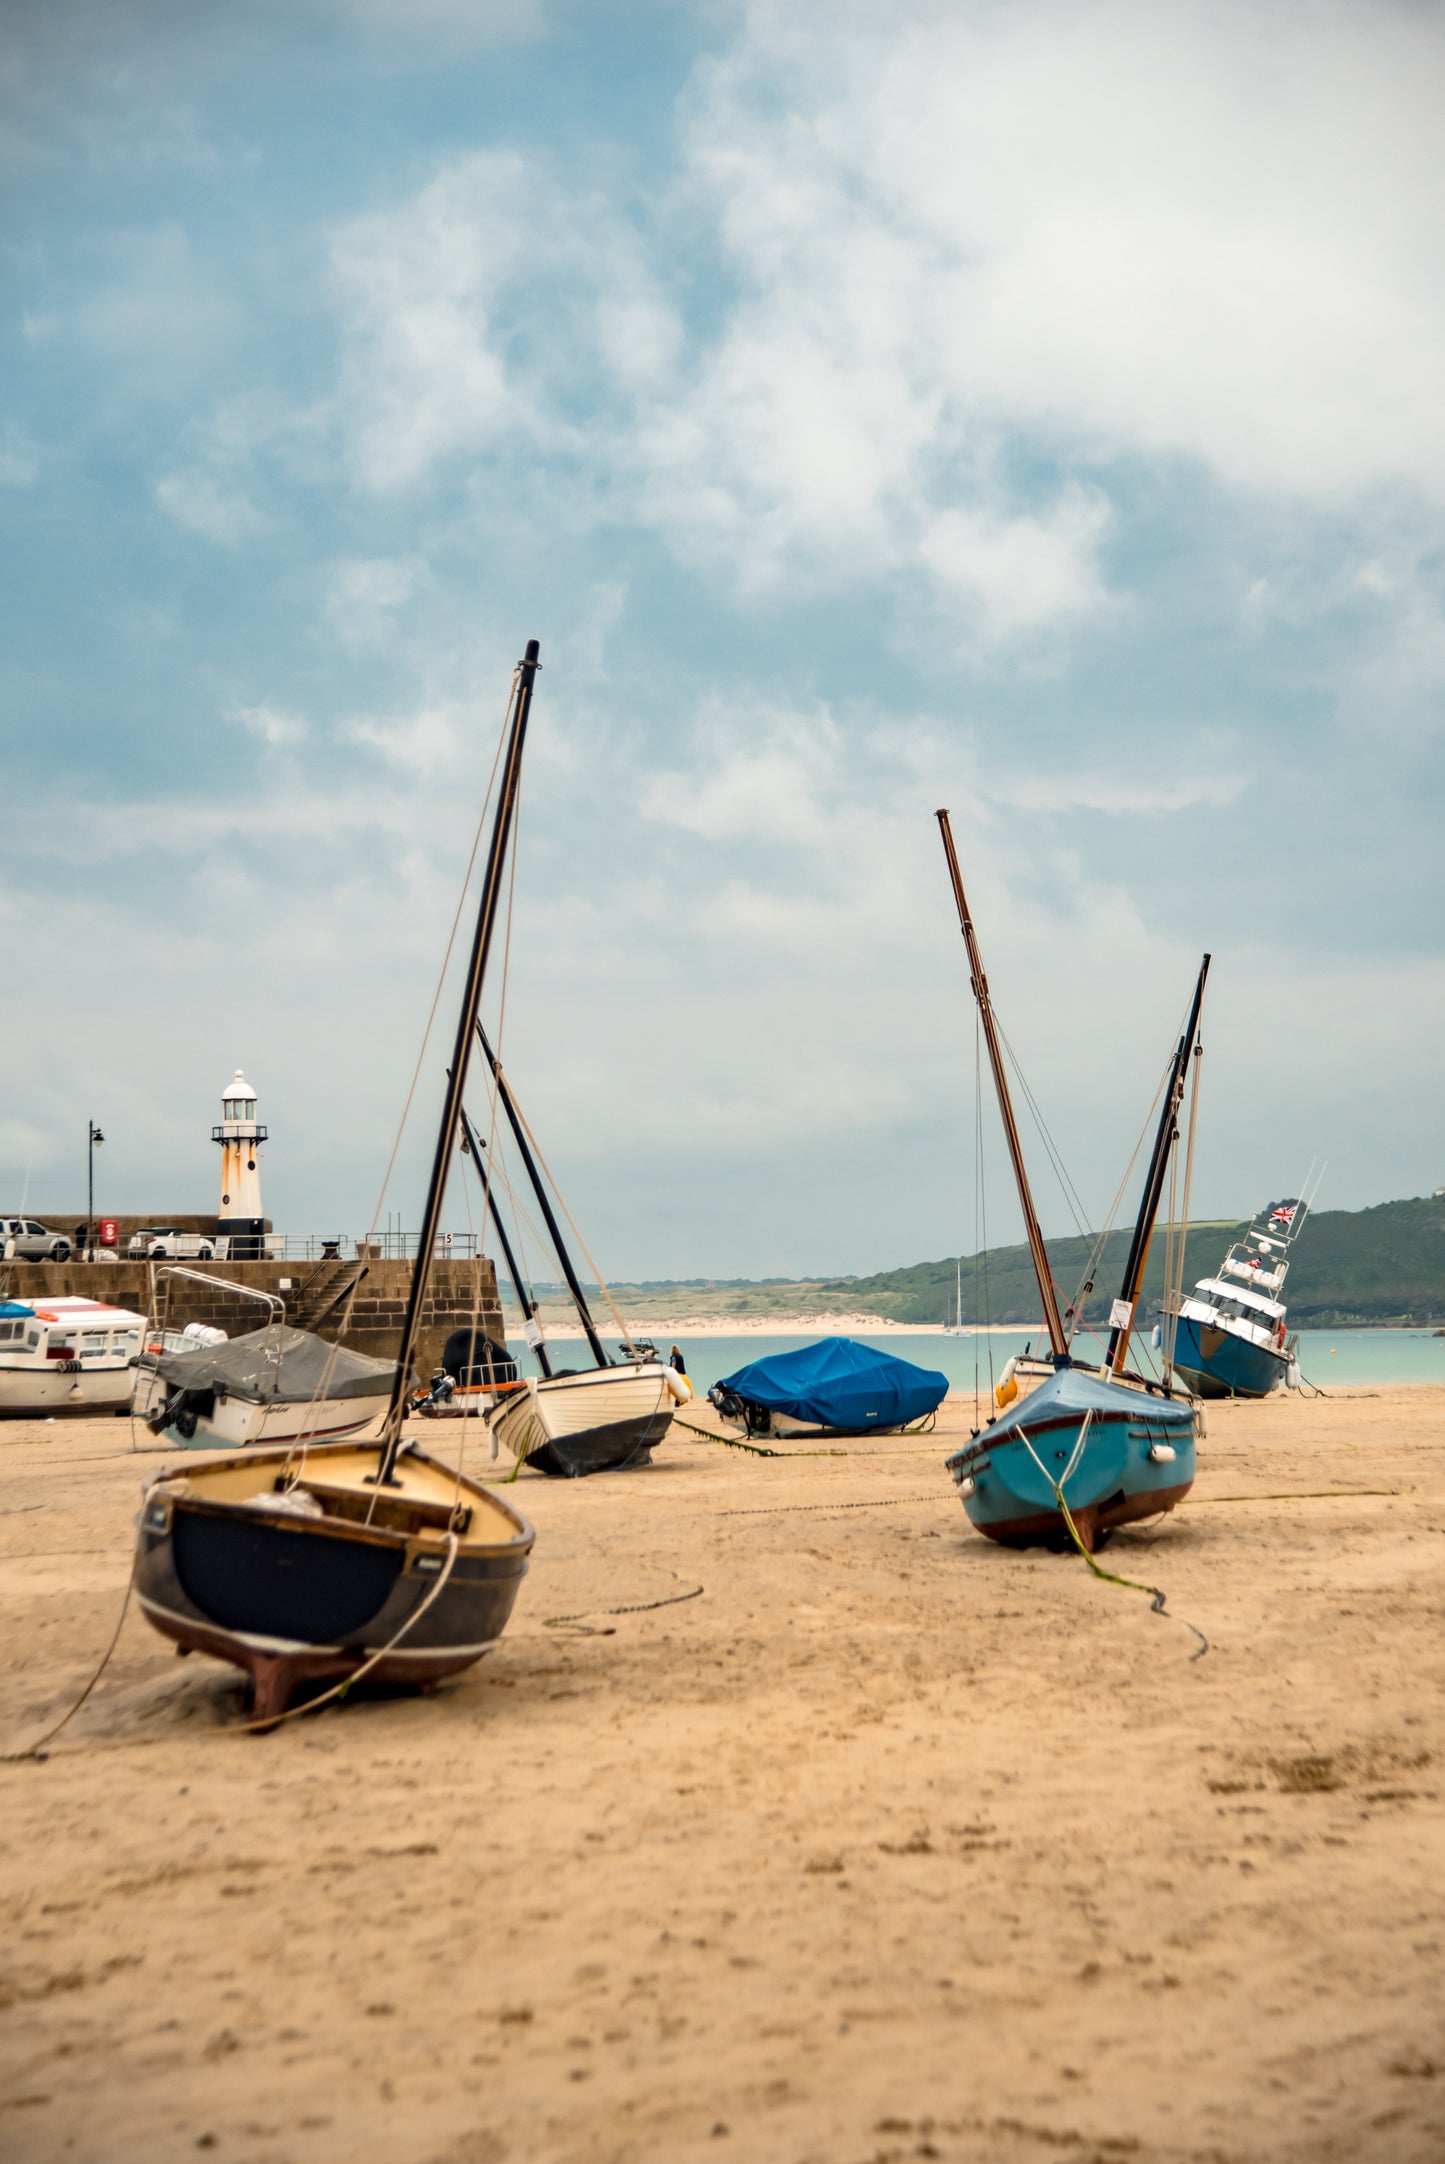 Stationed boats at low tide in St. Ive's - Cornwall, UK